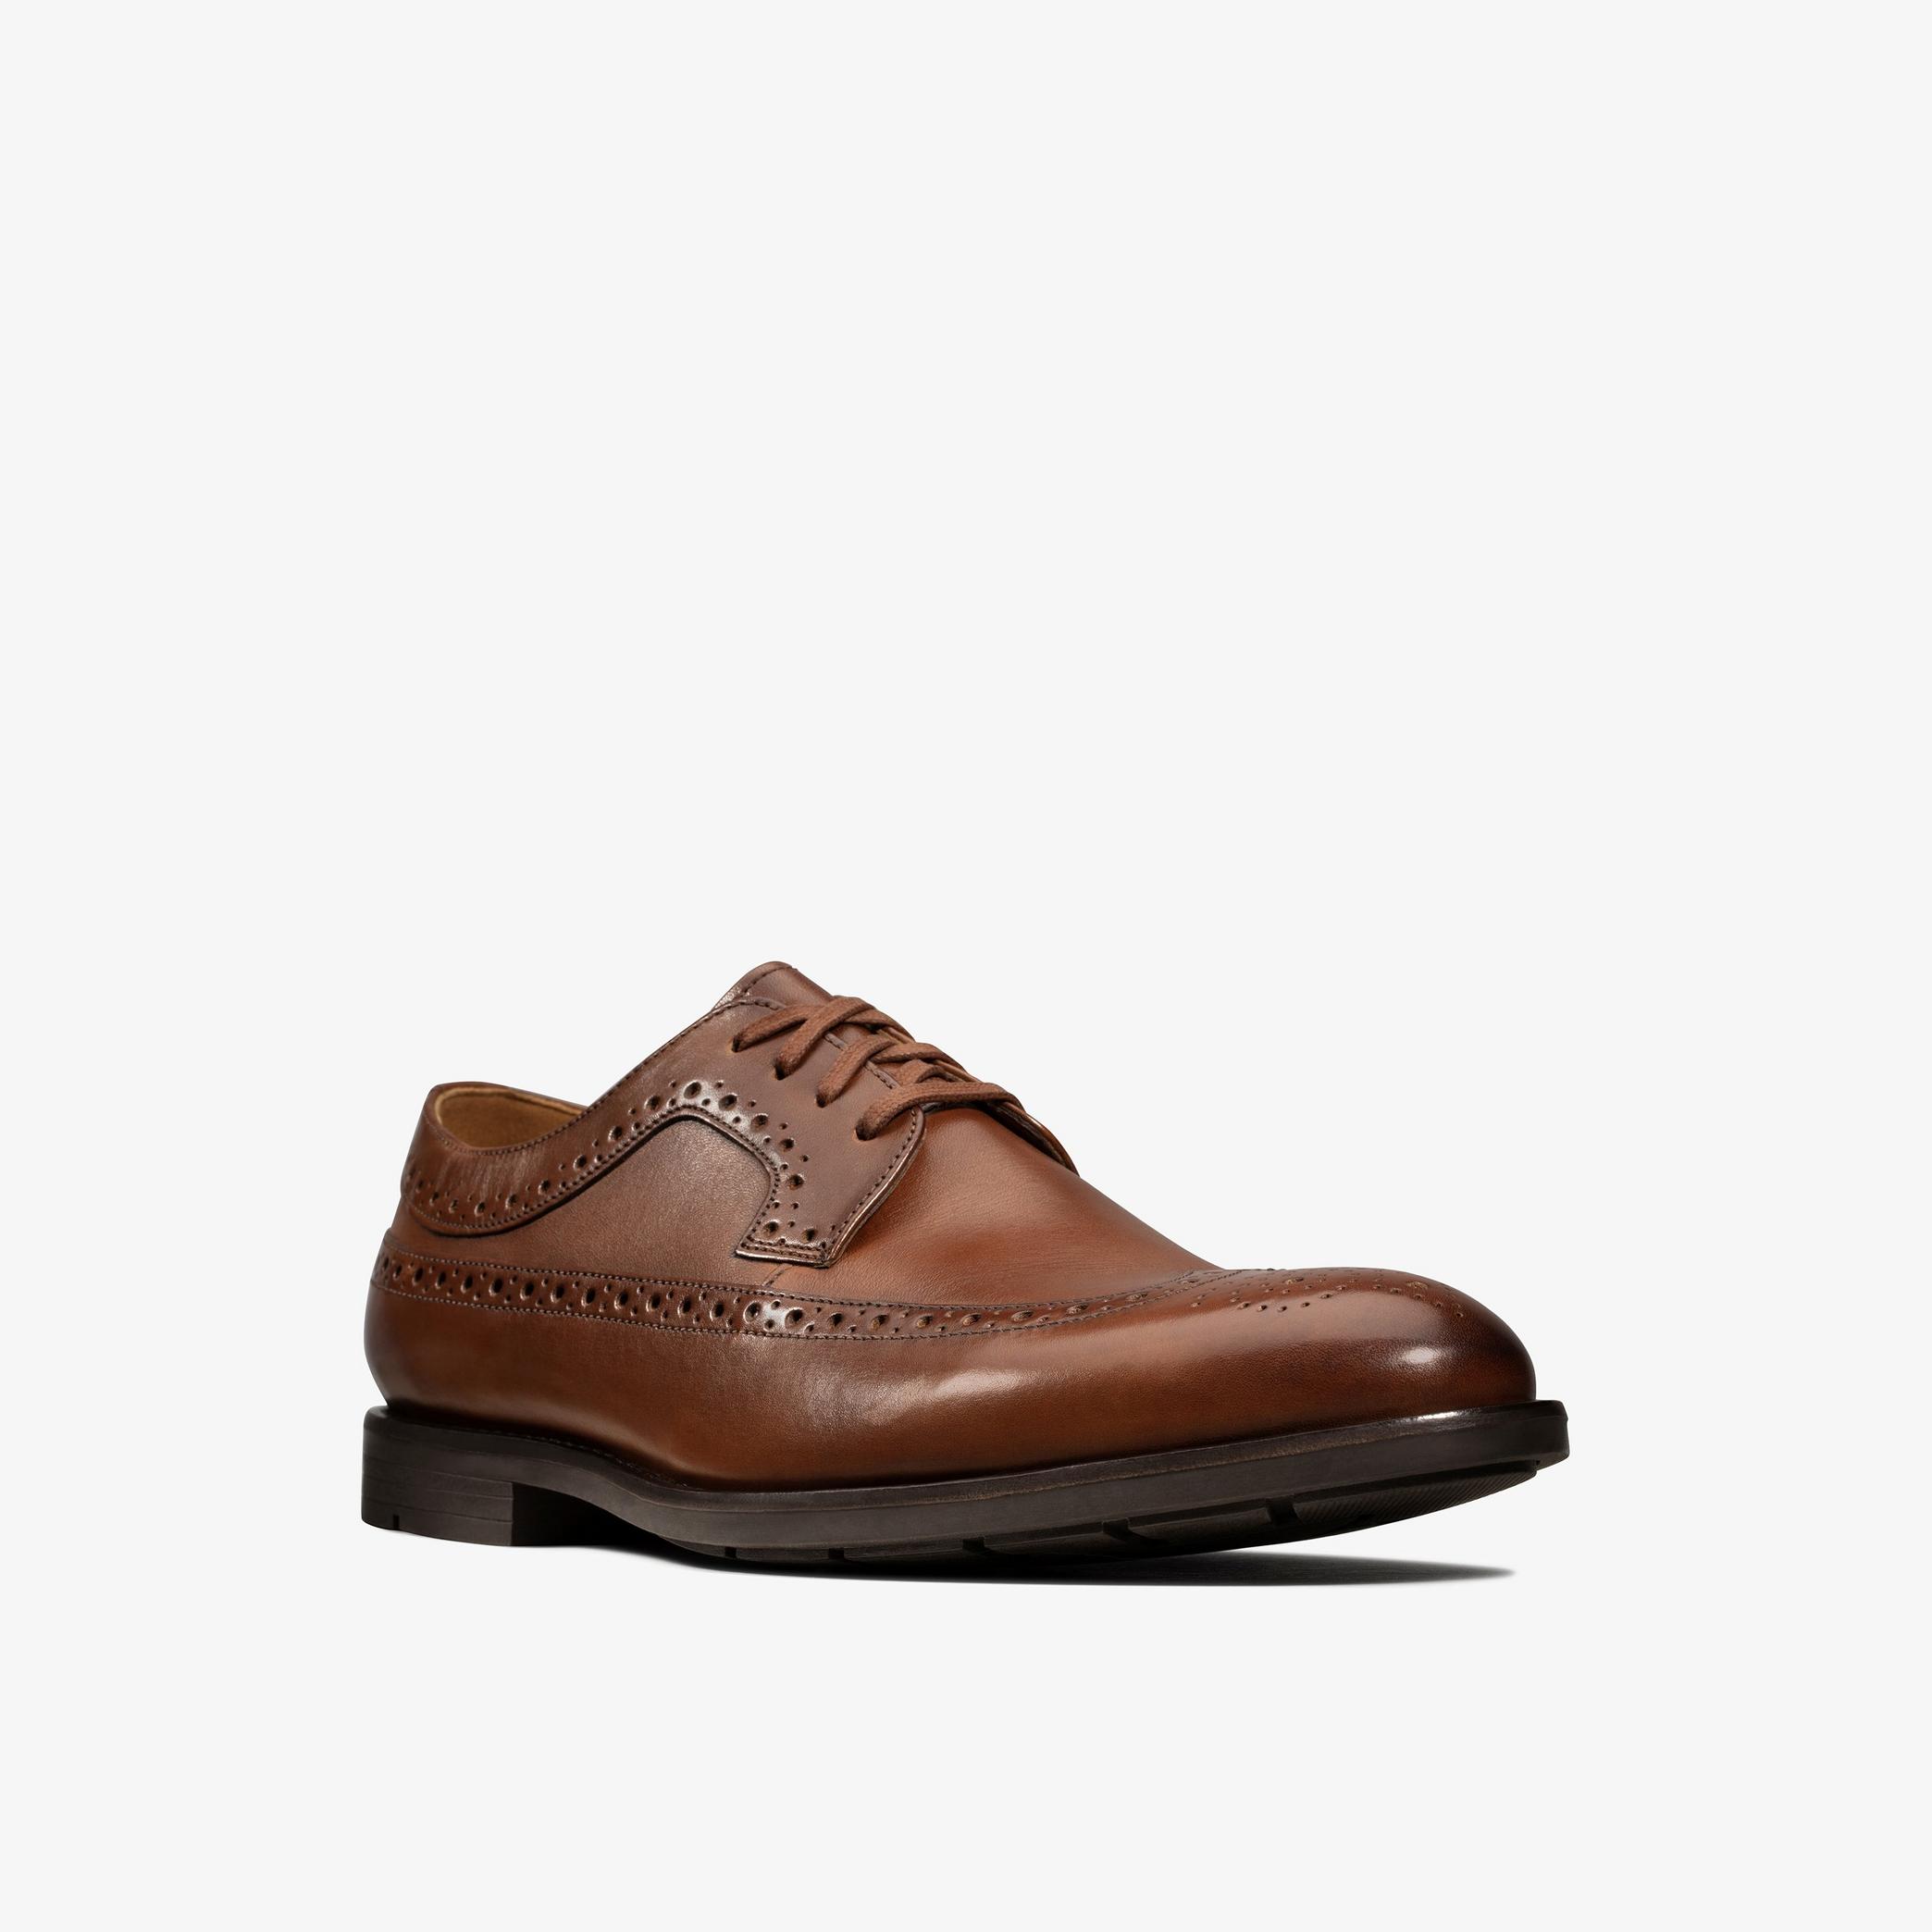 Ronnie Limit British Tan Leather Brogues, view 3 of 6